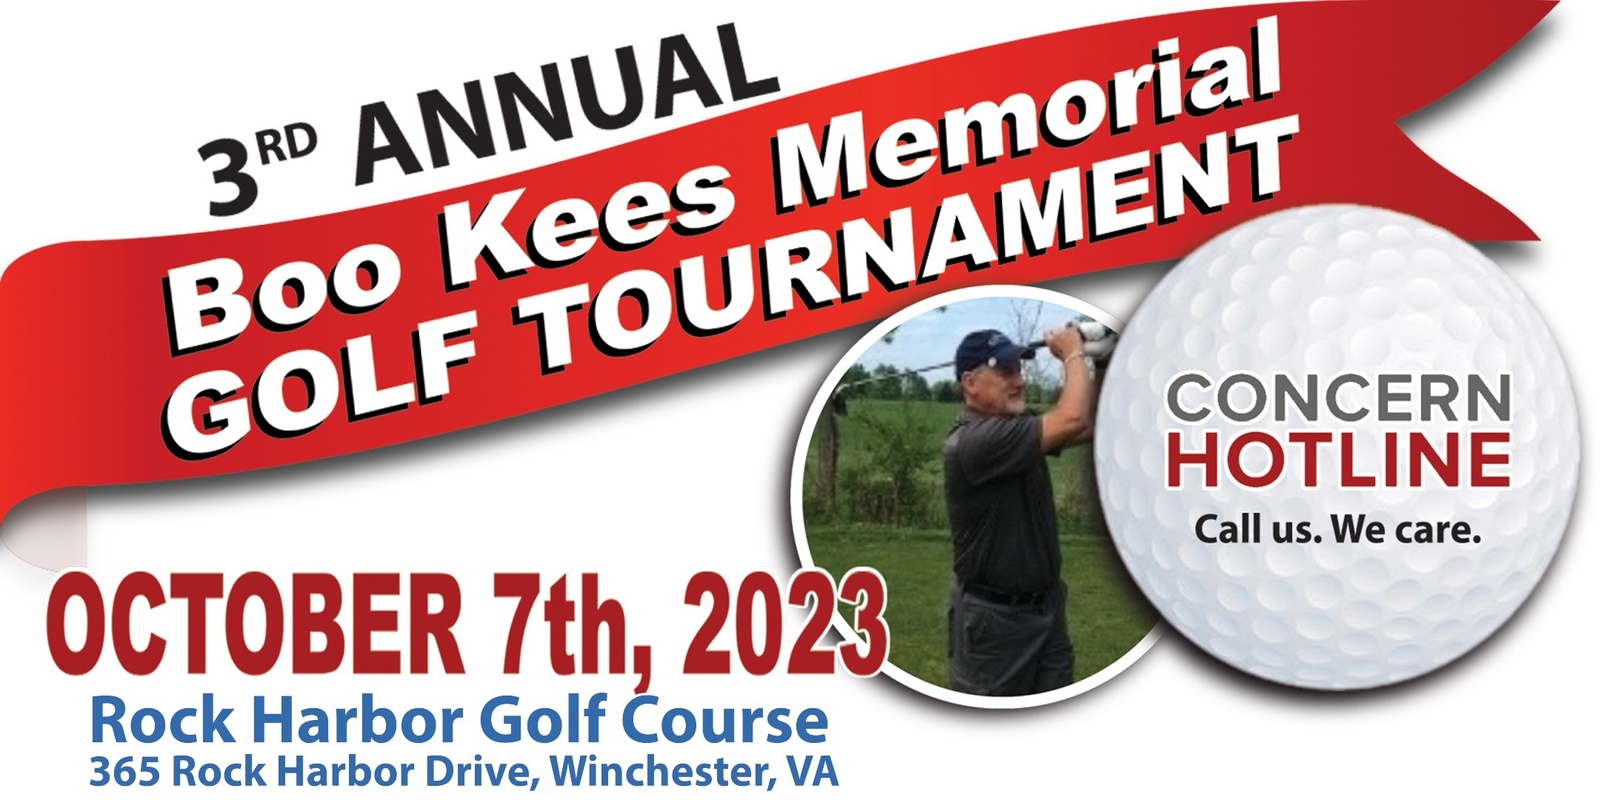 Banner image for 3rd Annual "Boo" Kees Memorial Golf tournament